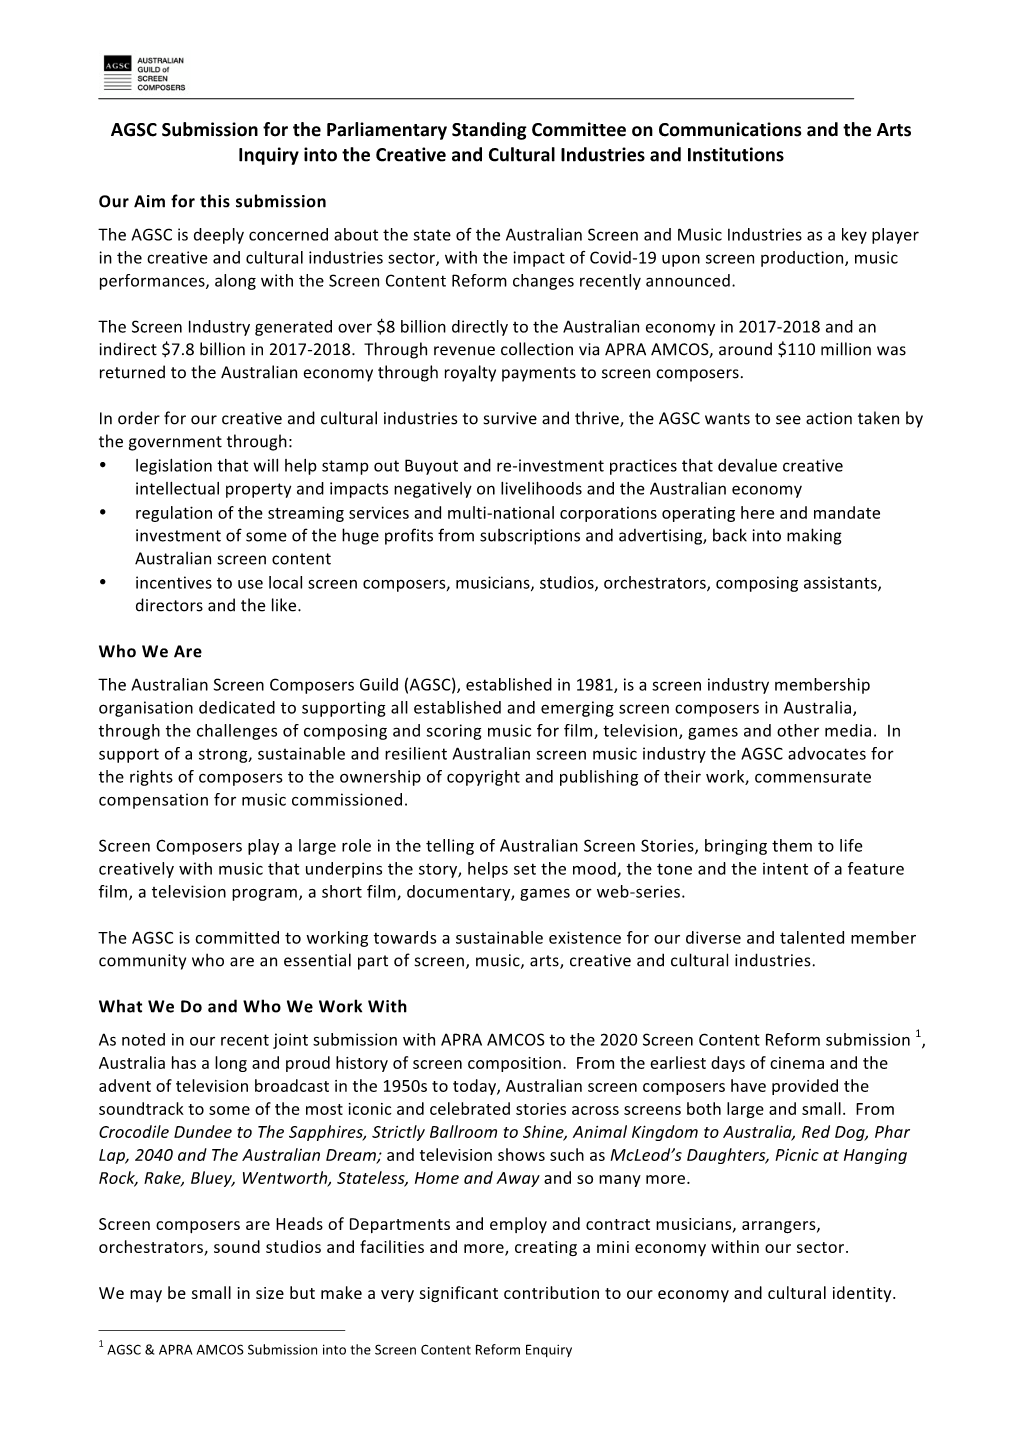 AGSC Submission for the Parliamentary Standing Committee on Communications and the Arts Inquiry Into the Creative and Cultural Industries and Institutions